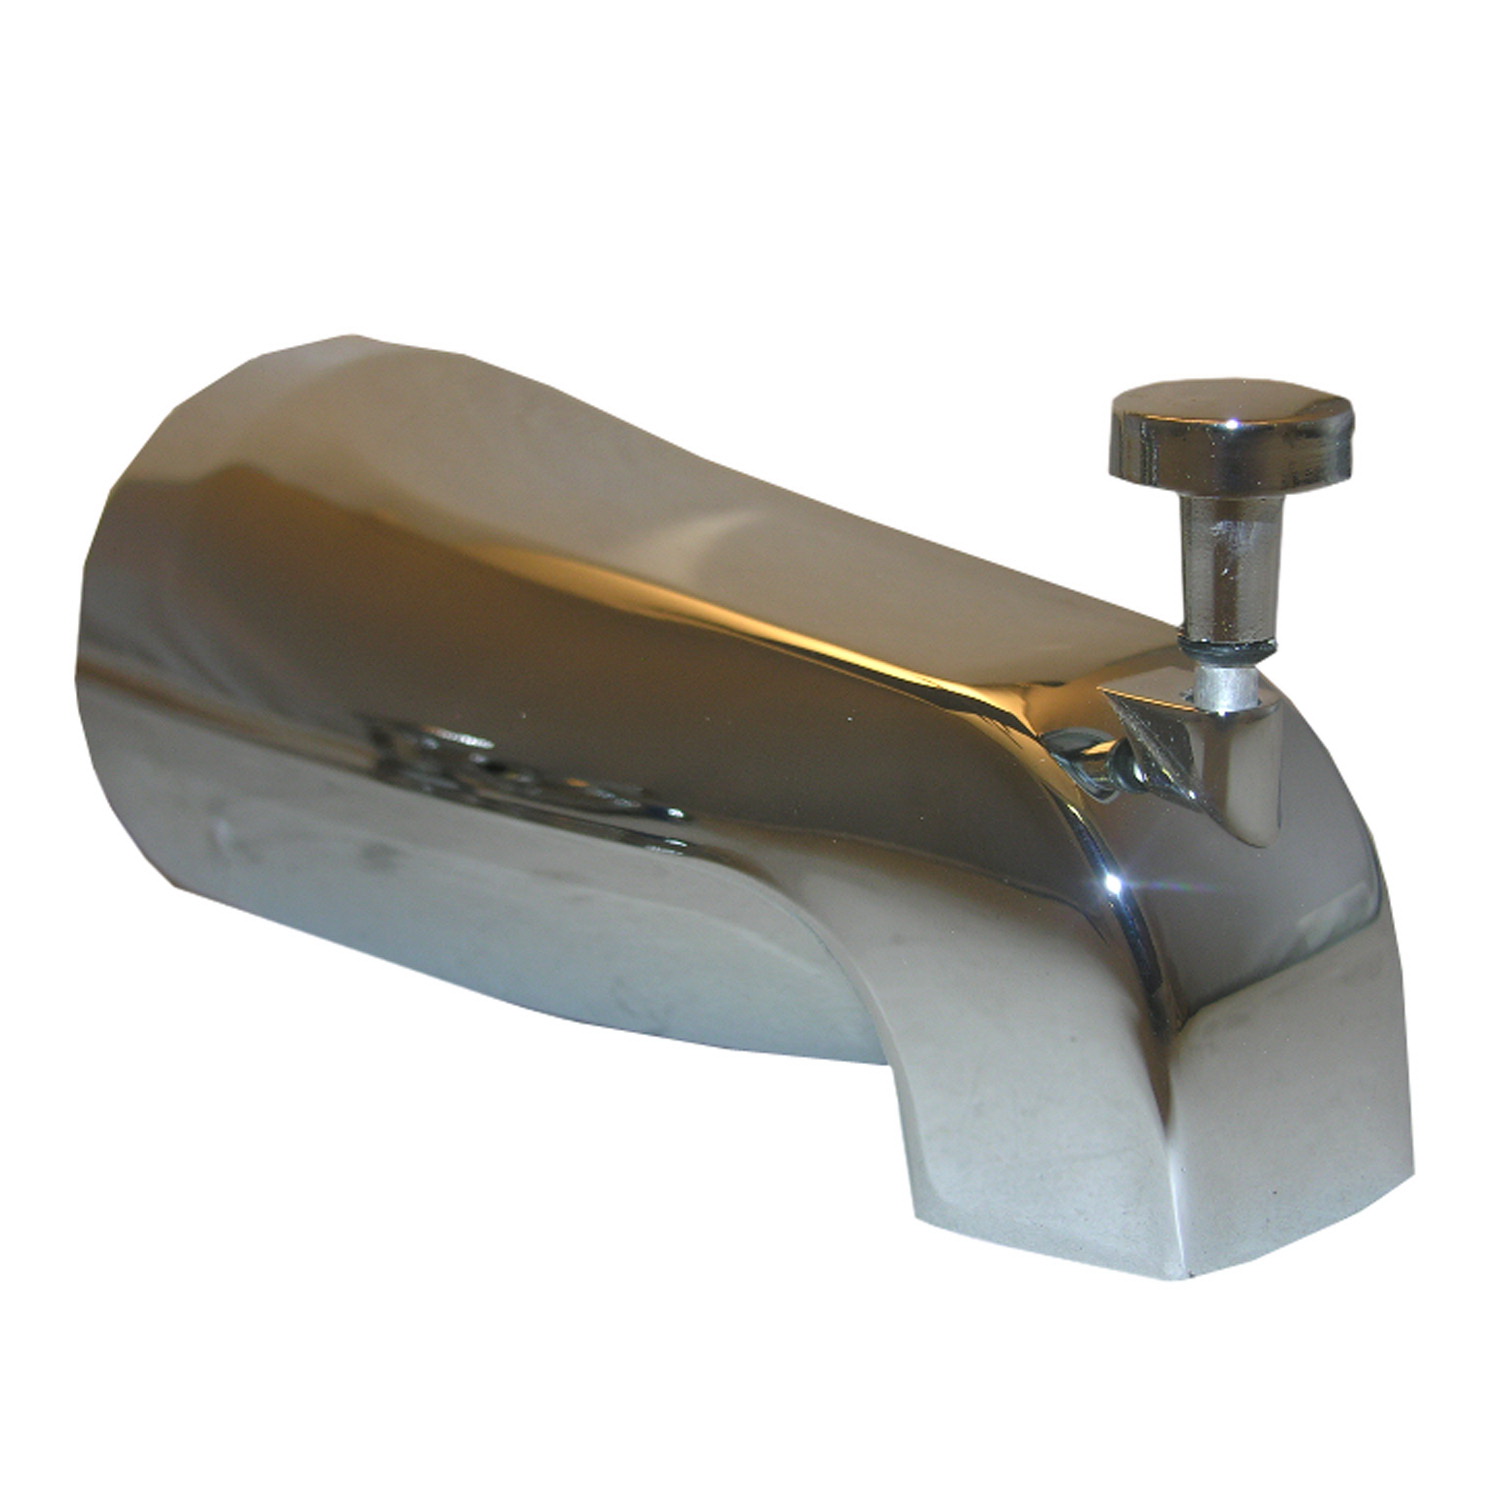 Lasco 08-1013 Bathtub Spout with Diverter, Chrome Plated, For: 5/8 in OD Copper Tube with Set Screw Application